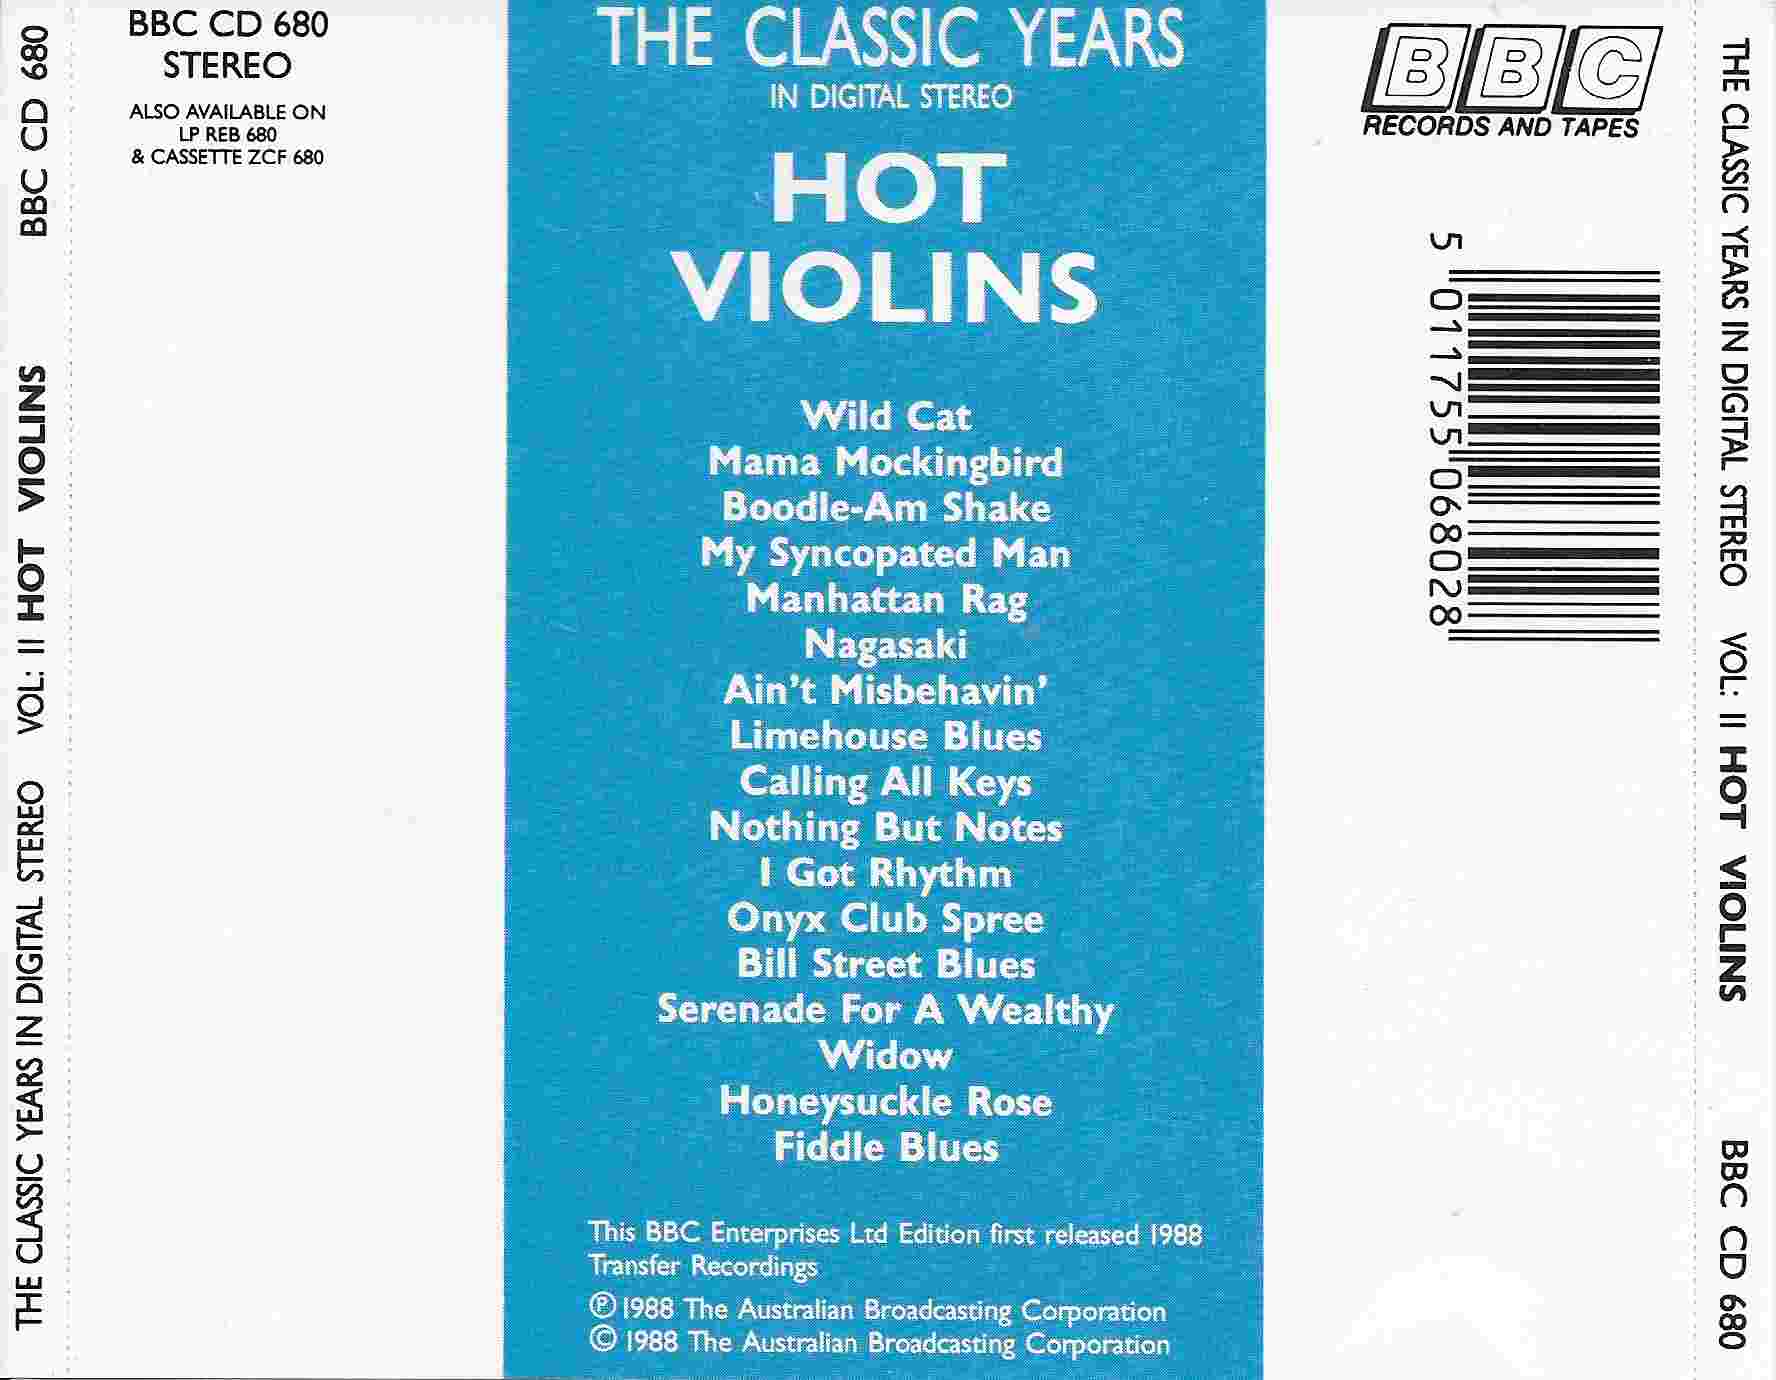 Picture of BBCCD680 Classic years - Volume 11, Hot violins by artist Various from the BBC records and Tapes library